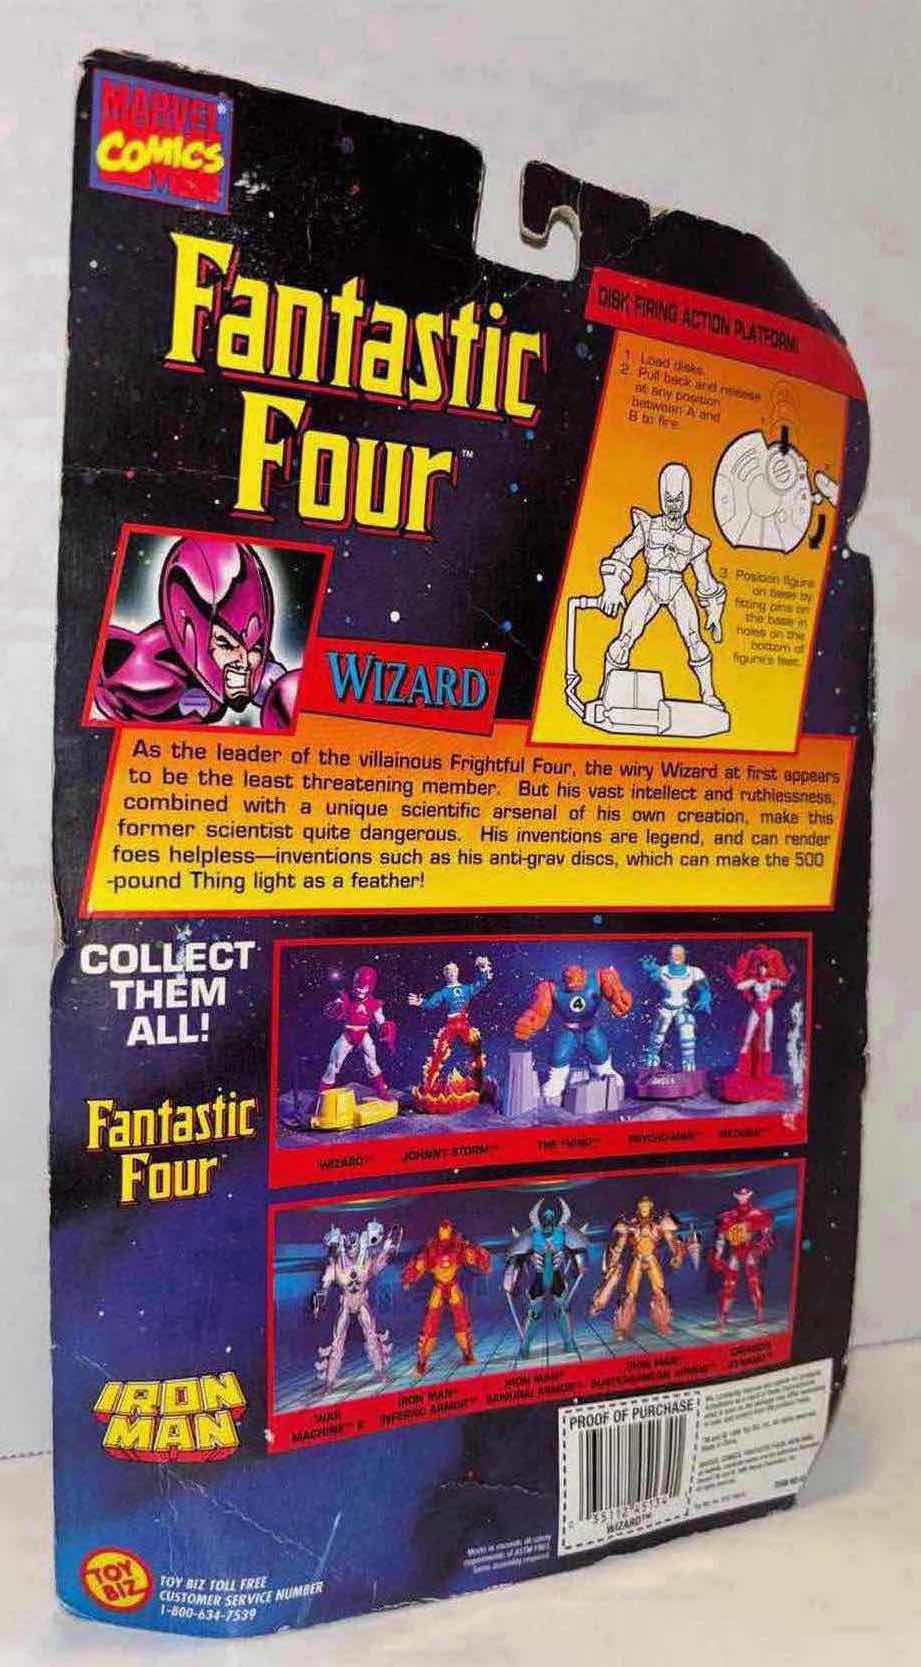 Photo 2 of NEW 1996 TOY BIZ MARVEL COMICS FANTASTIC FOUR ACTION FIGURE & ACCESSORIES, “WIZARD” W DISK FIRING ACTION PLATFORM